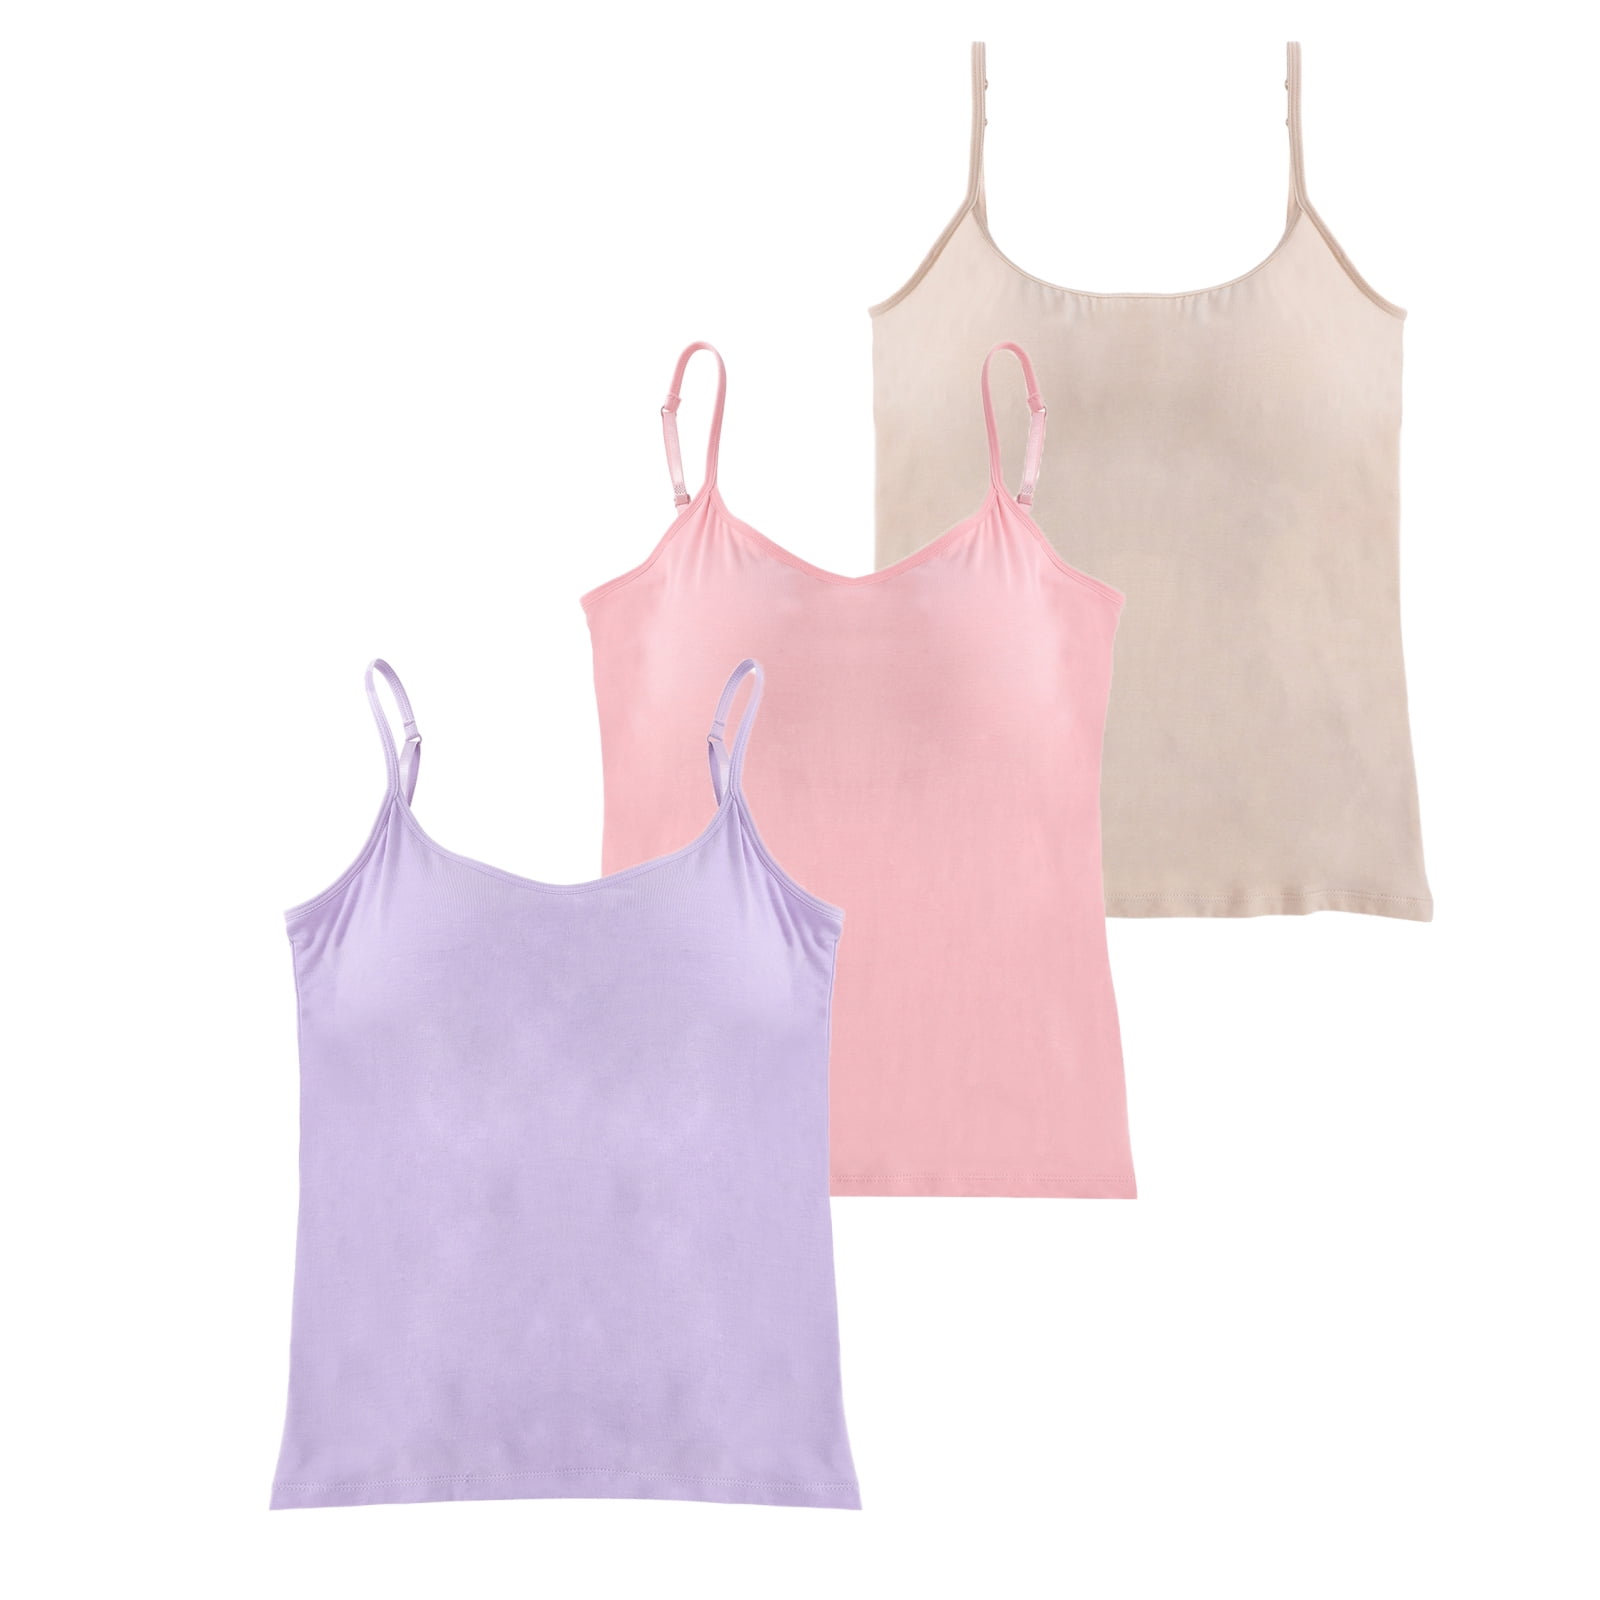 Women's Cami with Built-in Bra Adjustable Strap, 3 Pack Summer Sleeveless  Tank Top Padded Camisole for Yoga